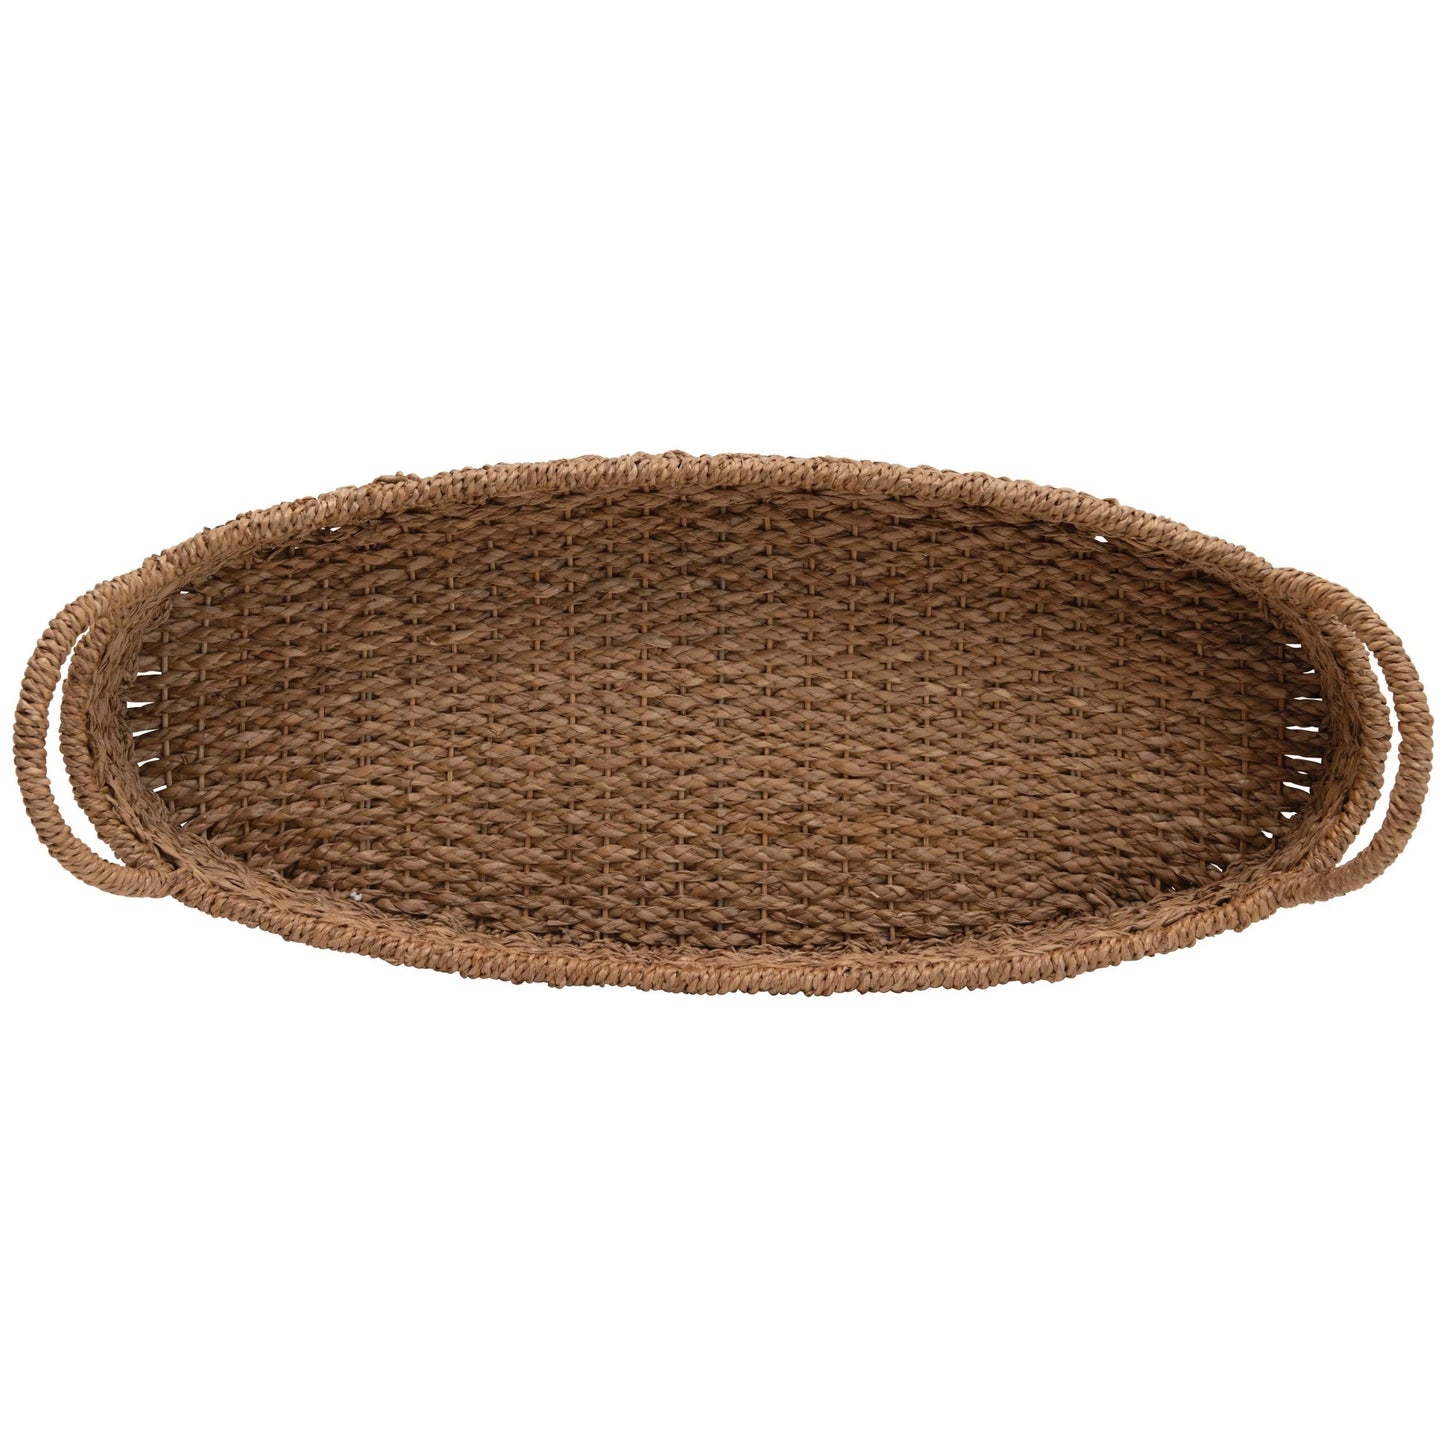 Woven Seagrass Oval Tray w/ Handles